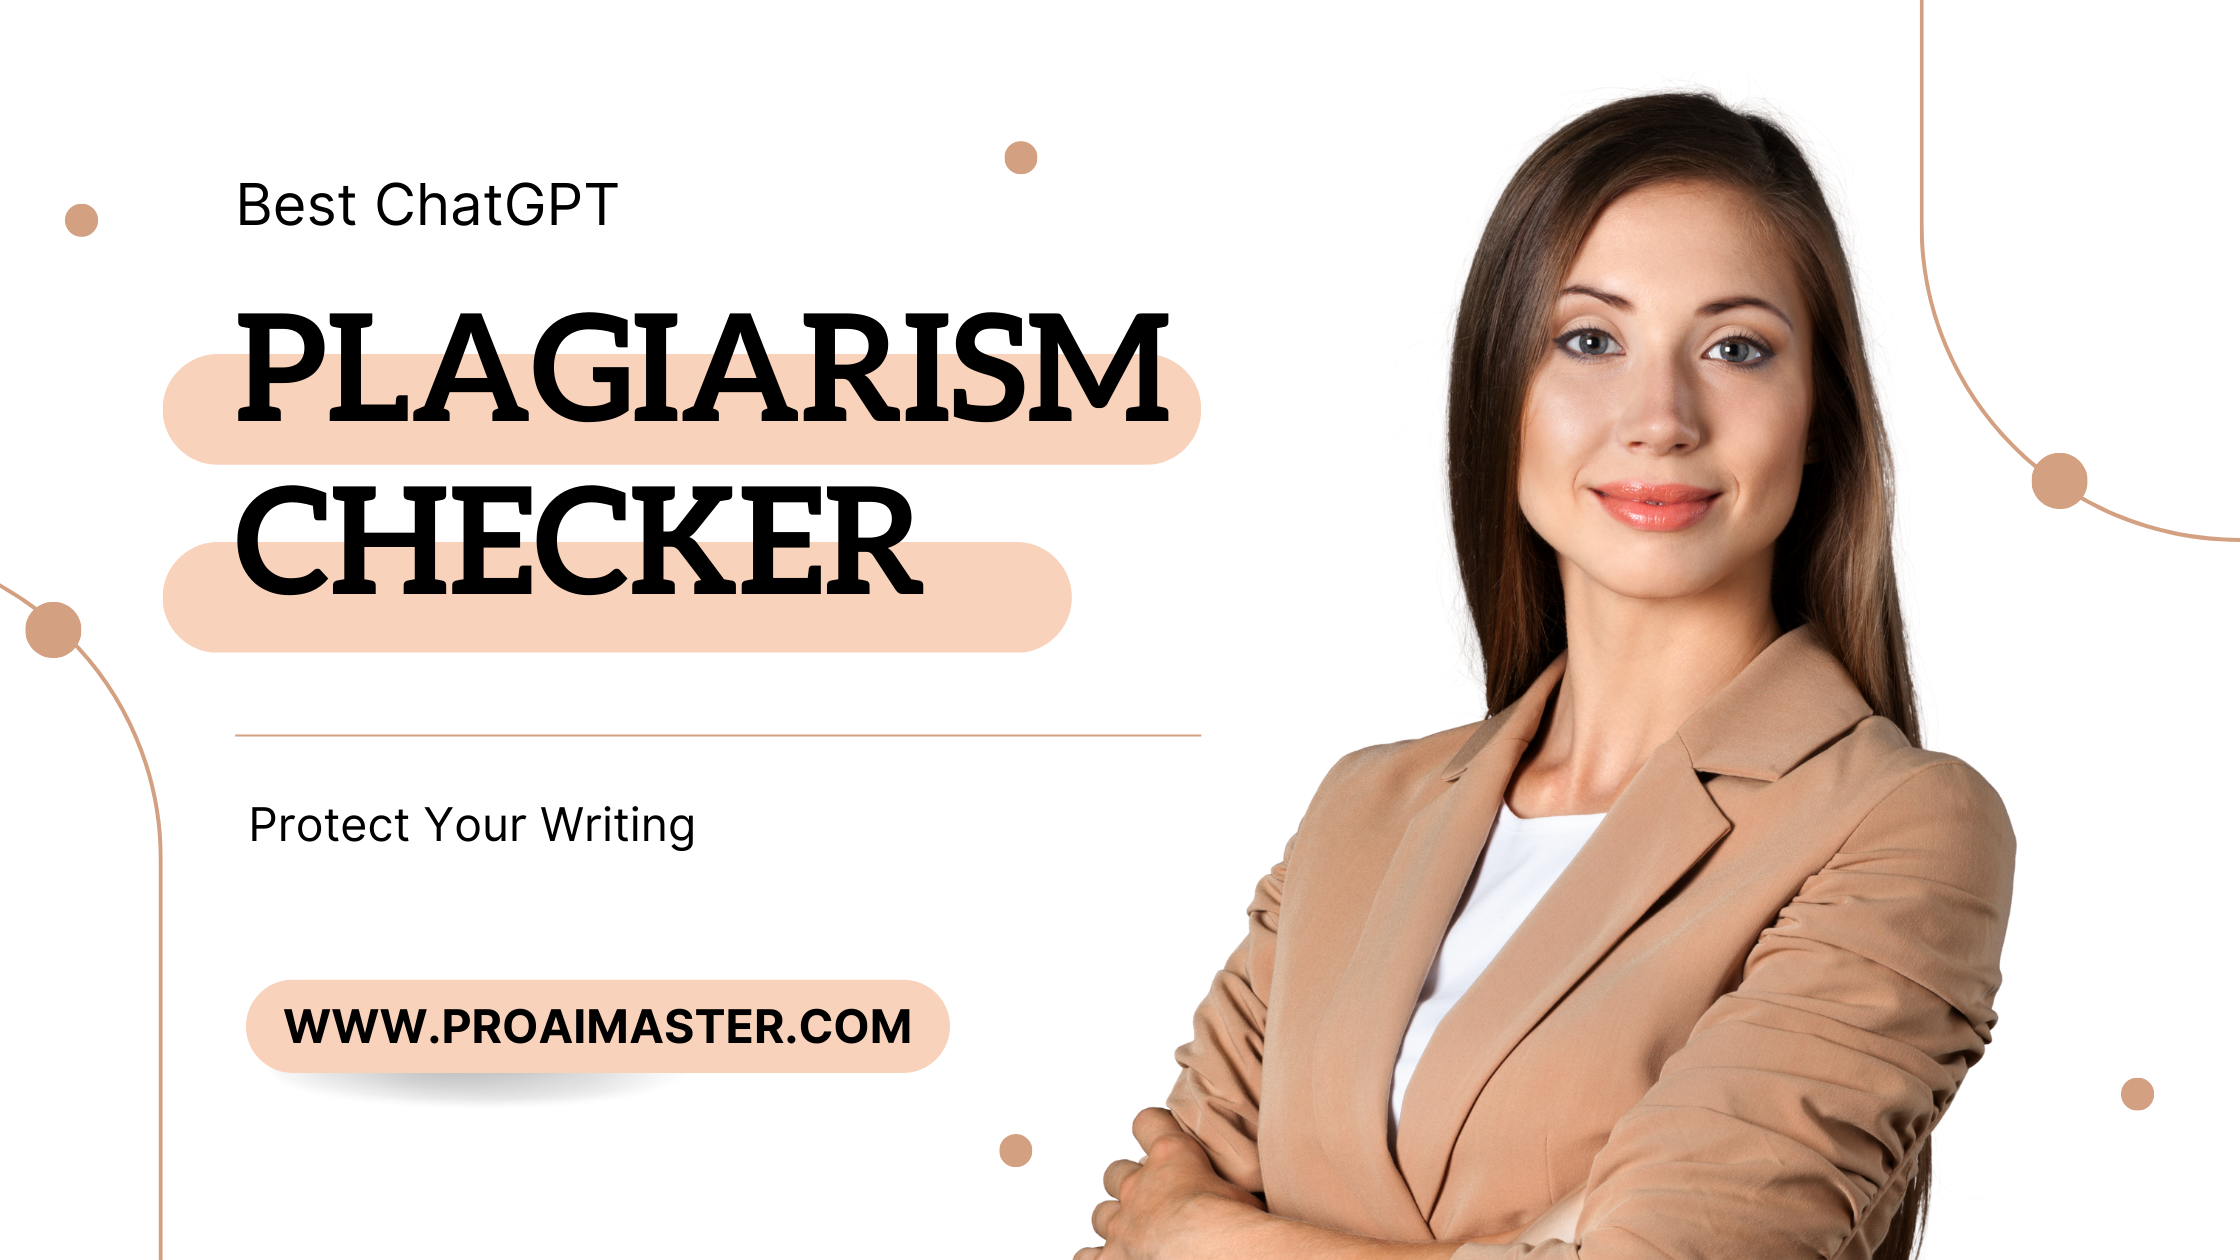 Best ChatGPT Plagiarism Checker 2023: Protect Your Writing